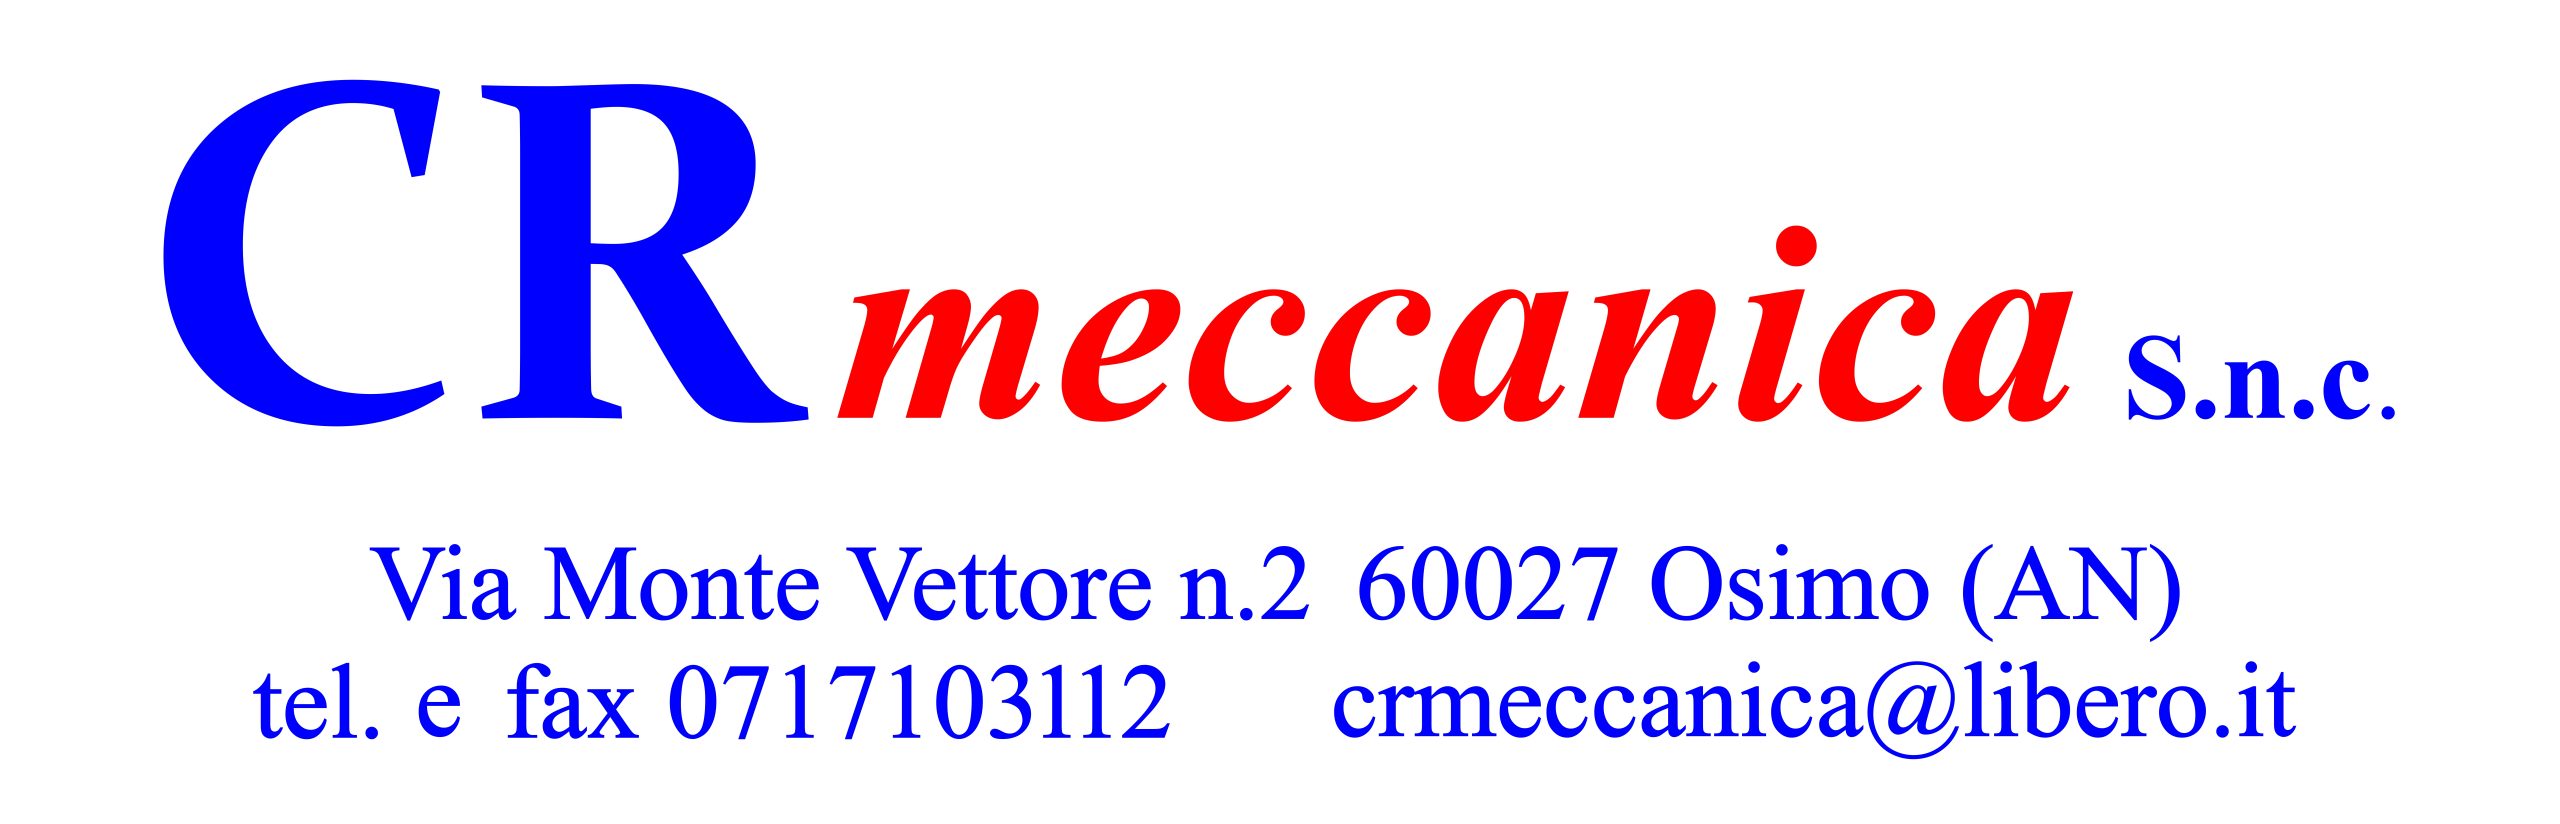 CR-Meccanica-3x1_page-0001-scaled